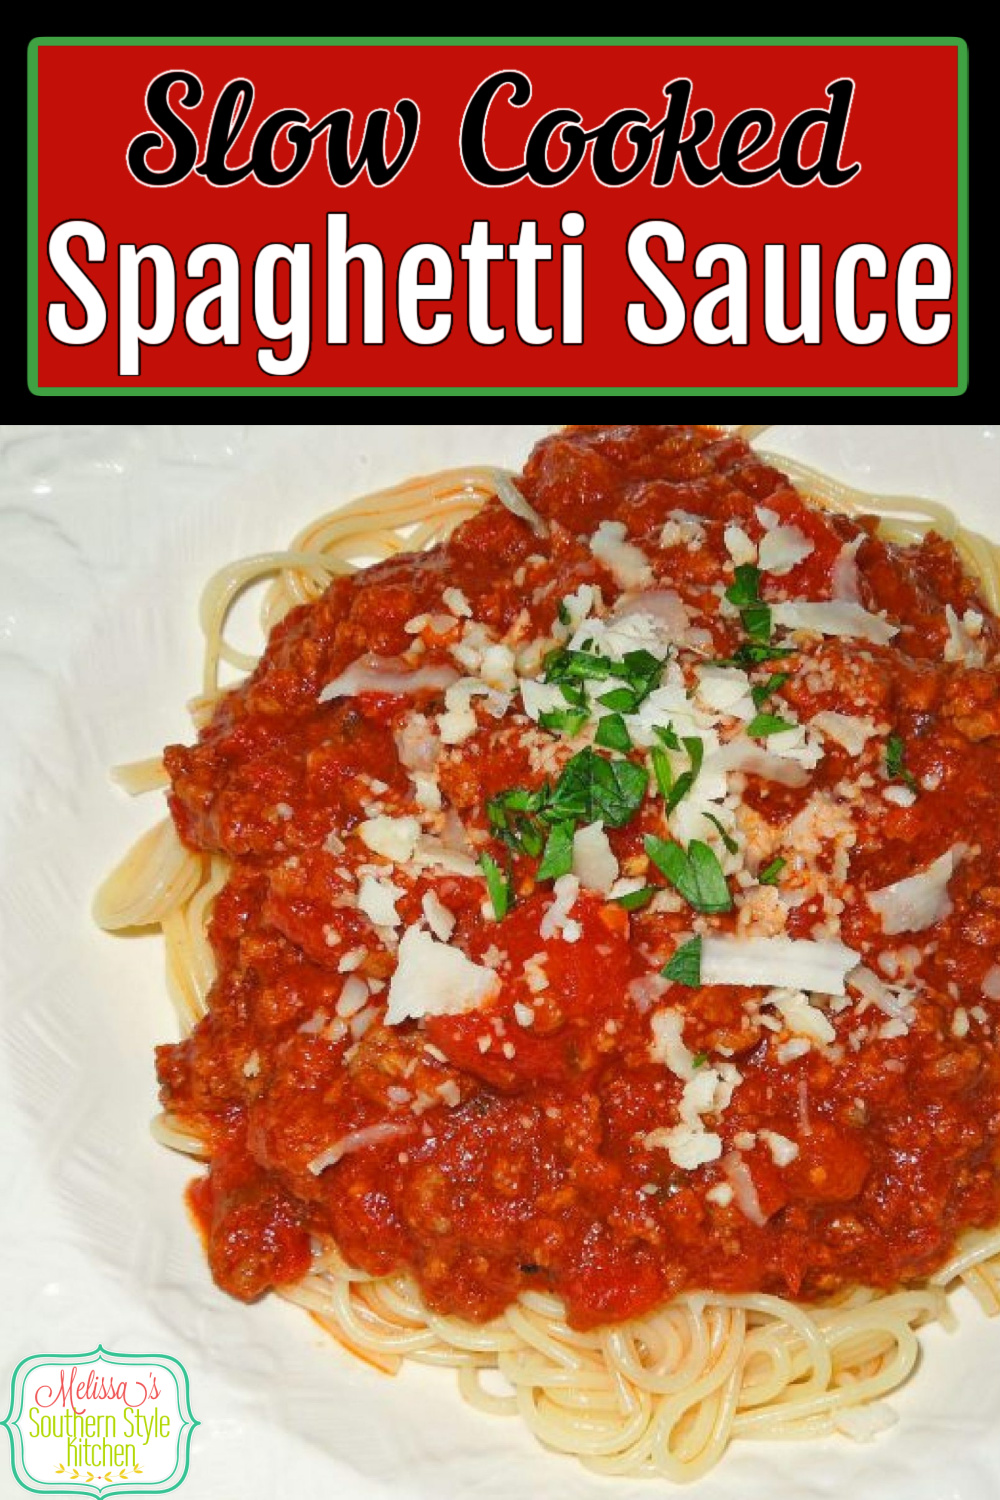 Simmer this rich and flavorful Slow Cooked Spaghetti Sauce all day and you'll have dinner on the table in no time flat #slowcookedspaghettisauce #spaghettisaucerecipes #spaghetti #pasta #easygroundbeefrecipes #slowcooking #crockpotrecipes via @melissasssk